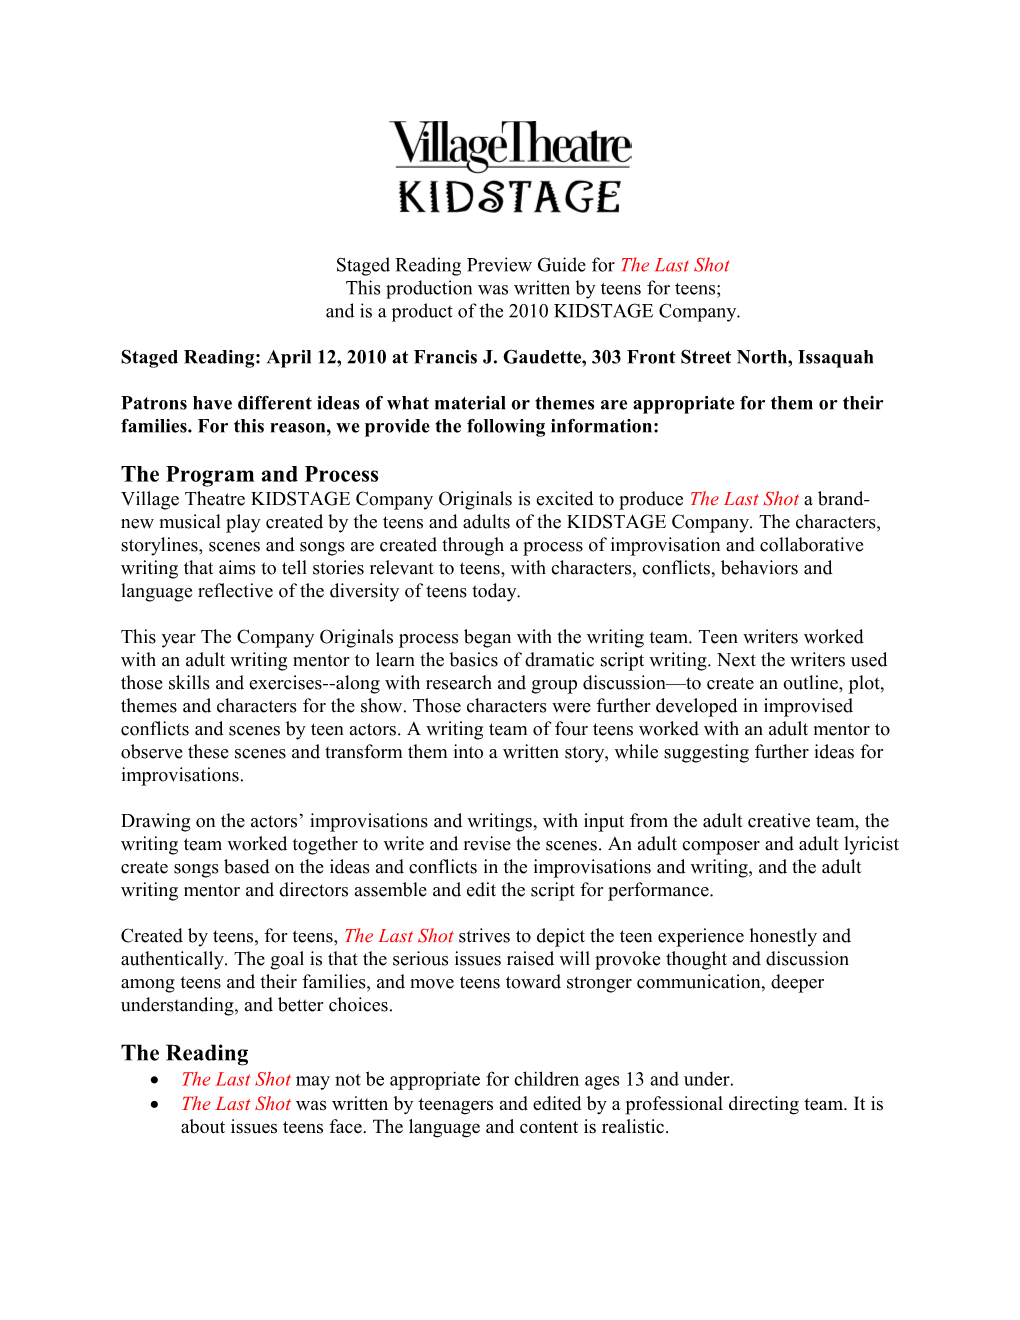 Staged Reading Preview Guide for the Last Shot